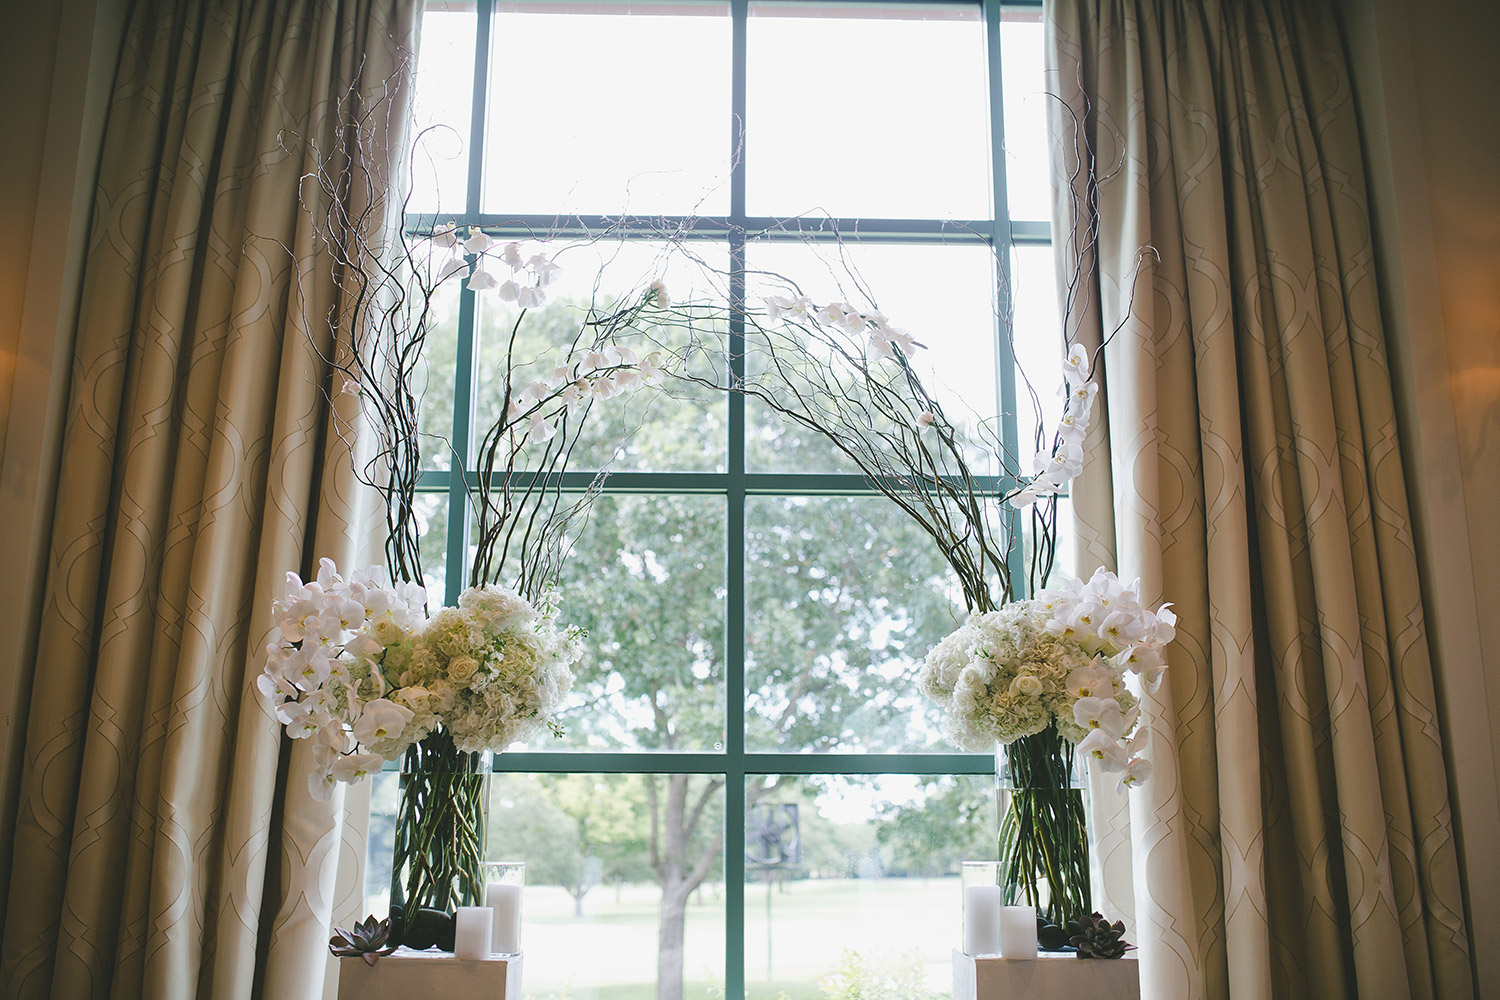 River Crest Country Clube Ceremony archway with white flowers, orchids, willow branches,  and white platforms